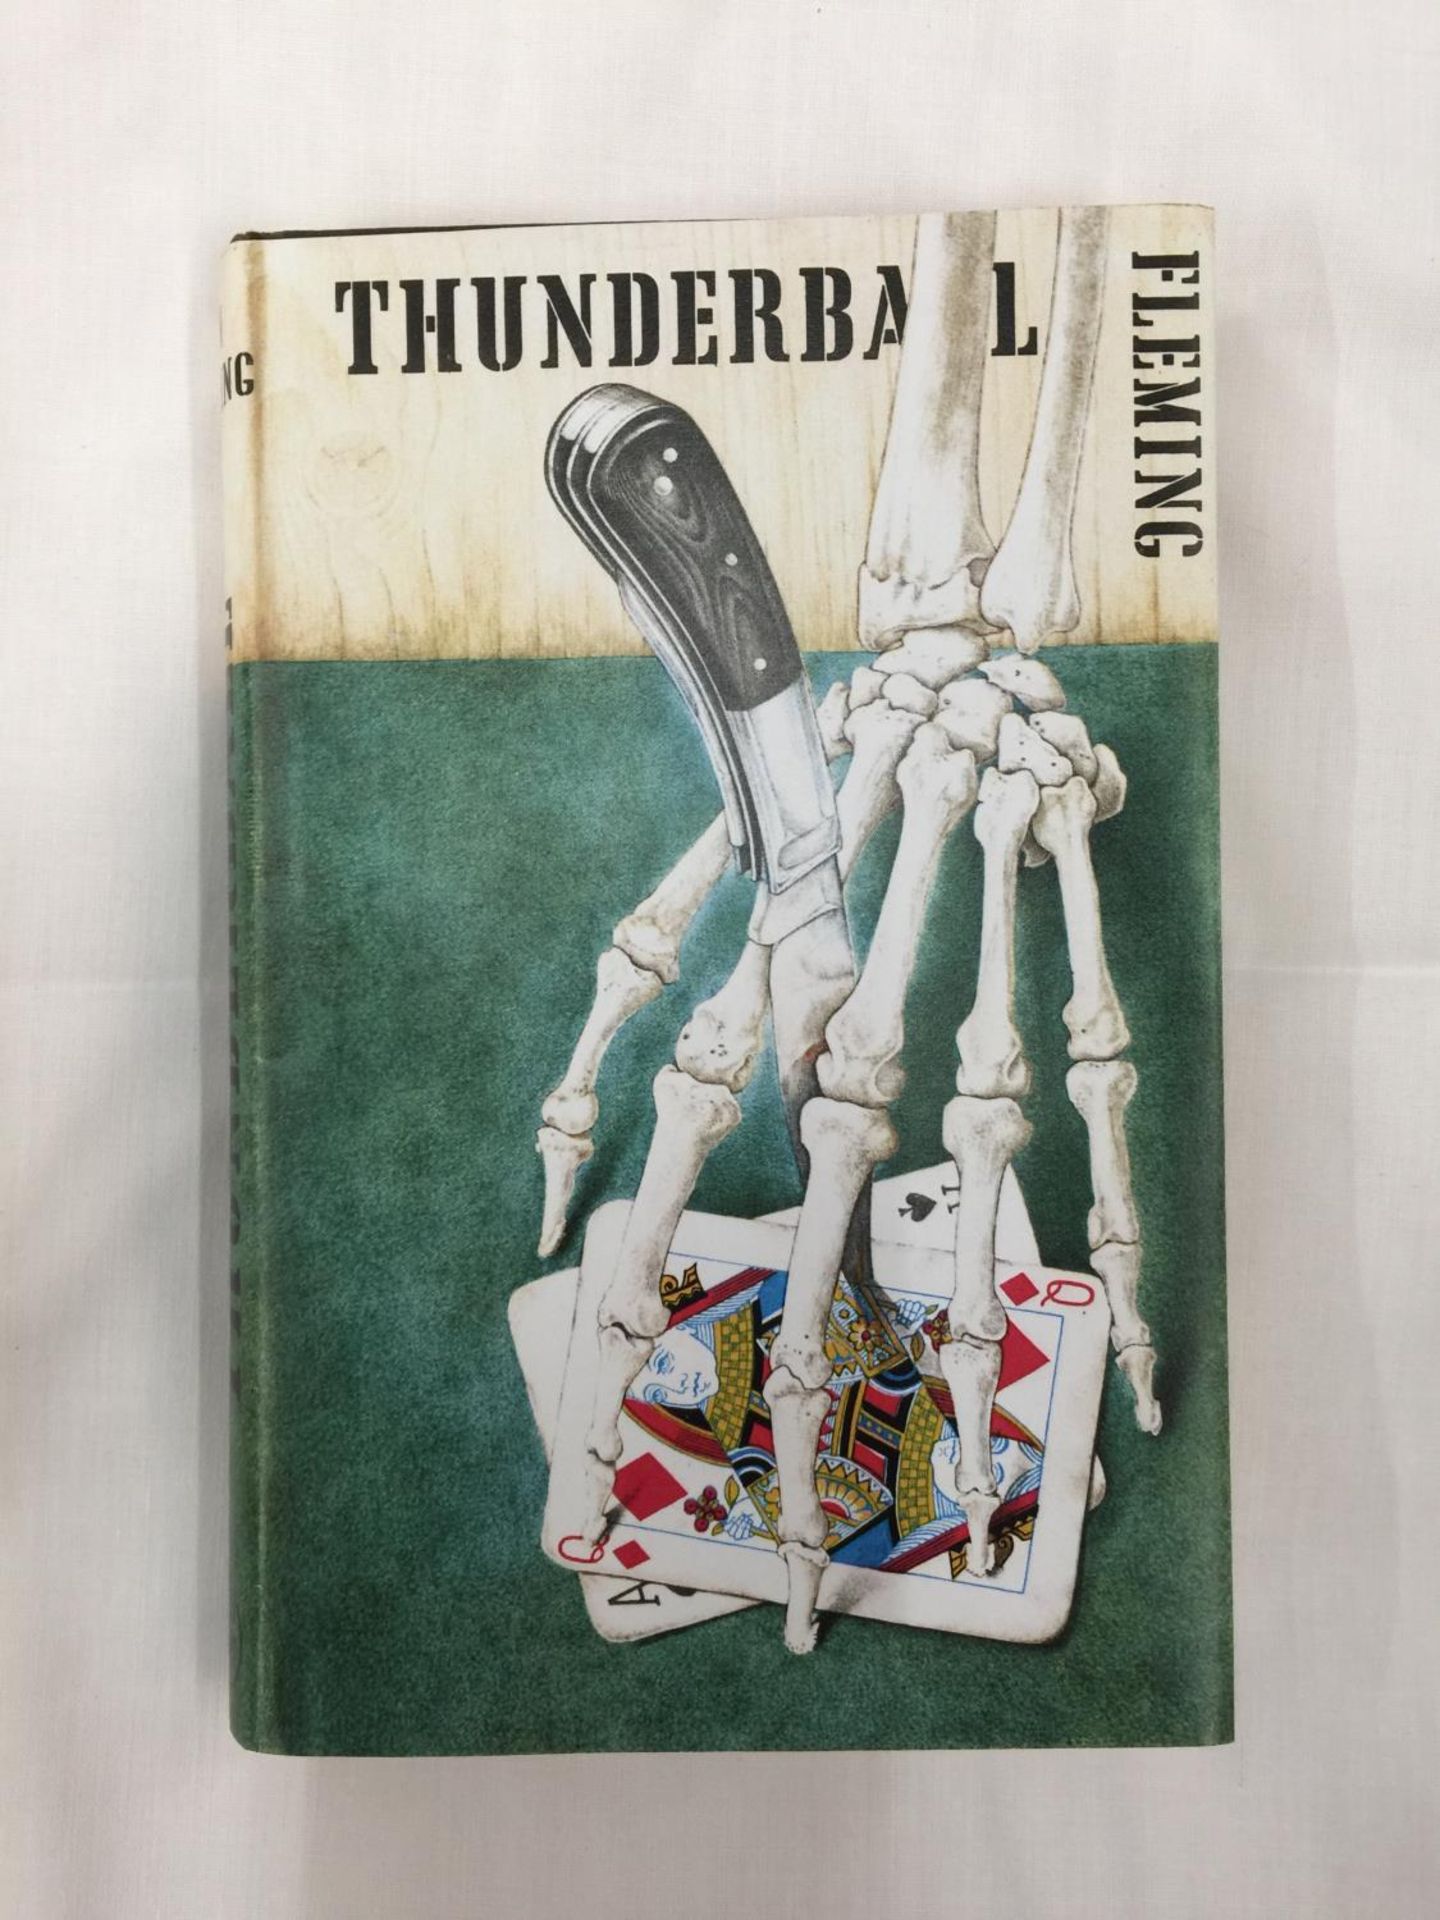 A FIRST EDITION JAMES BOND NOVEL - THUNDERBALL BY IAN FLEMING, HARDBACK WITH REPRINTED DUST JACKET -